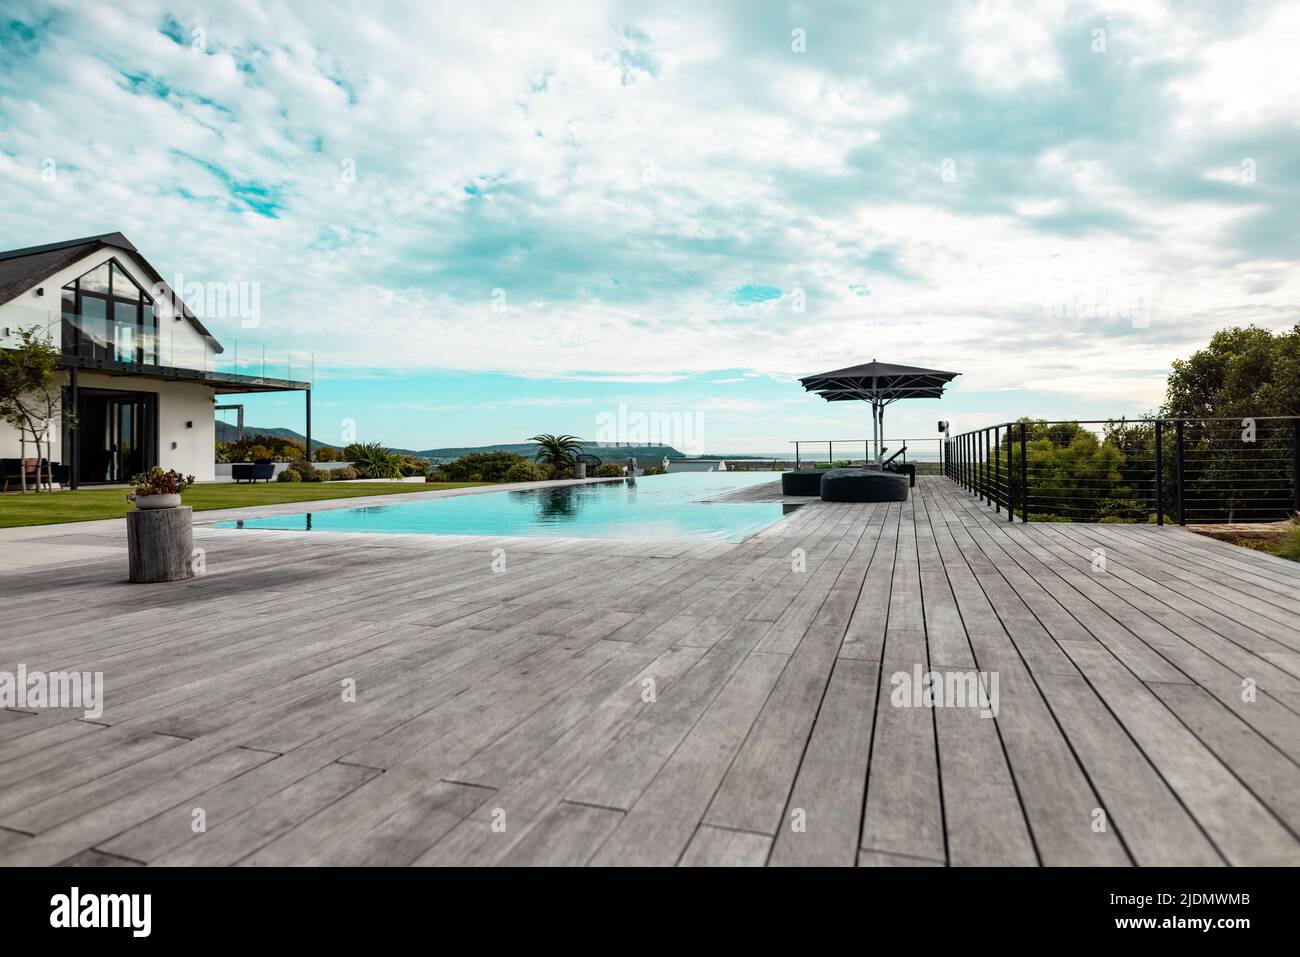 Swimming pool and hardwood floor in front of nursing home against cloudy sky Stock Photo